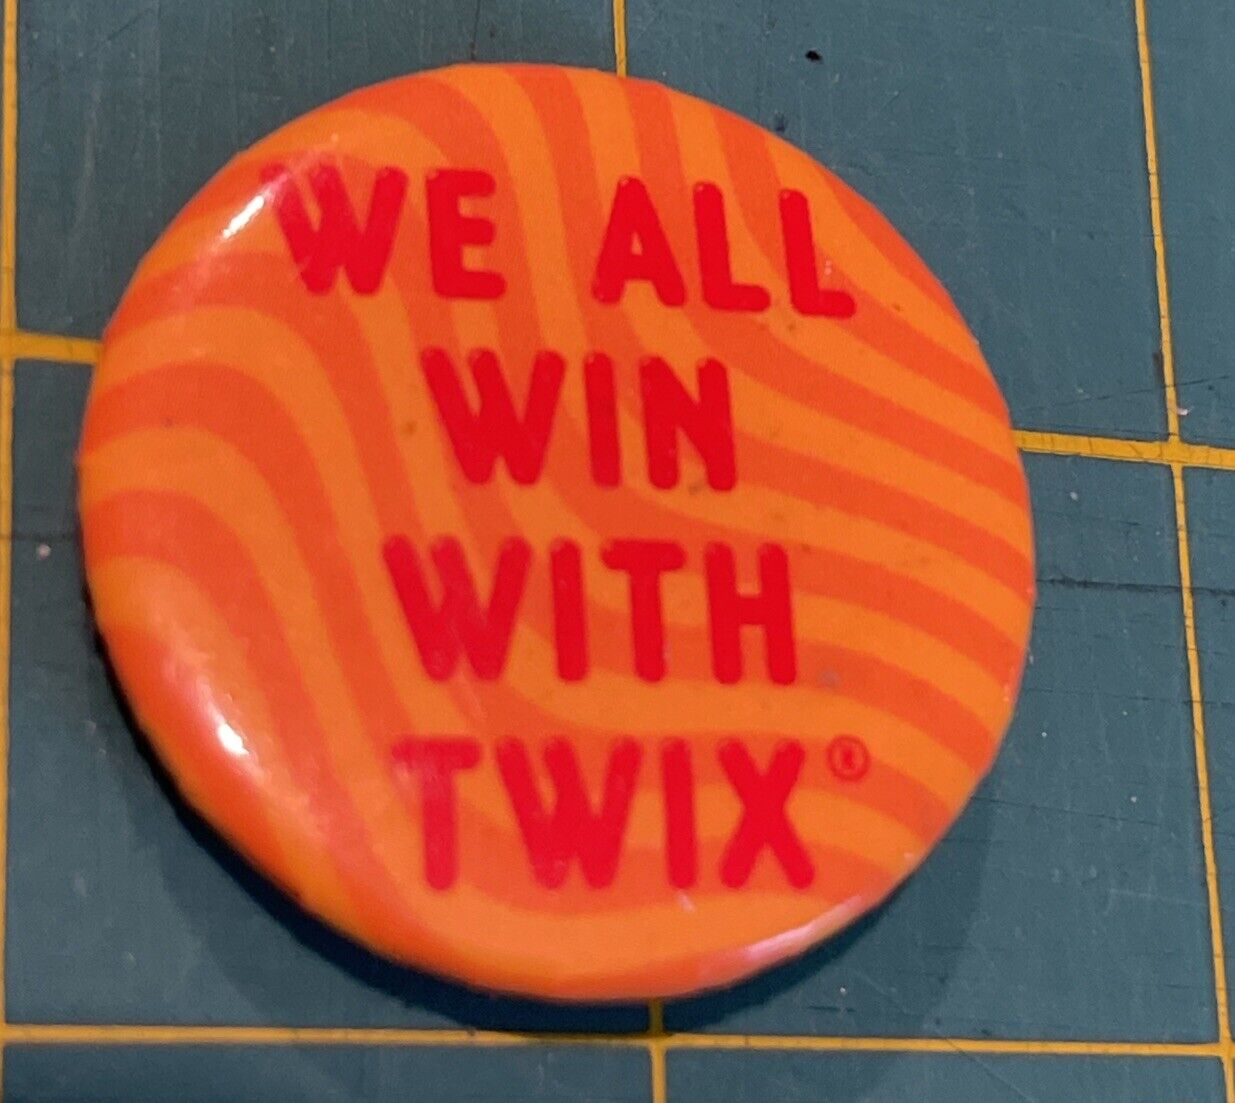 Vintage We All Win With Twix Candy Bar Pinback Button Advertising Mars Chocolate